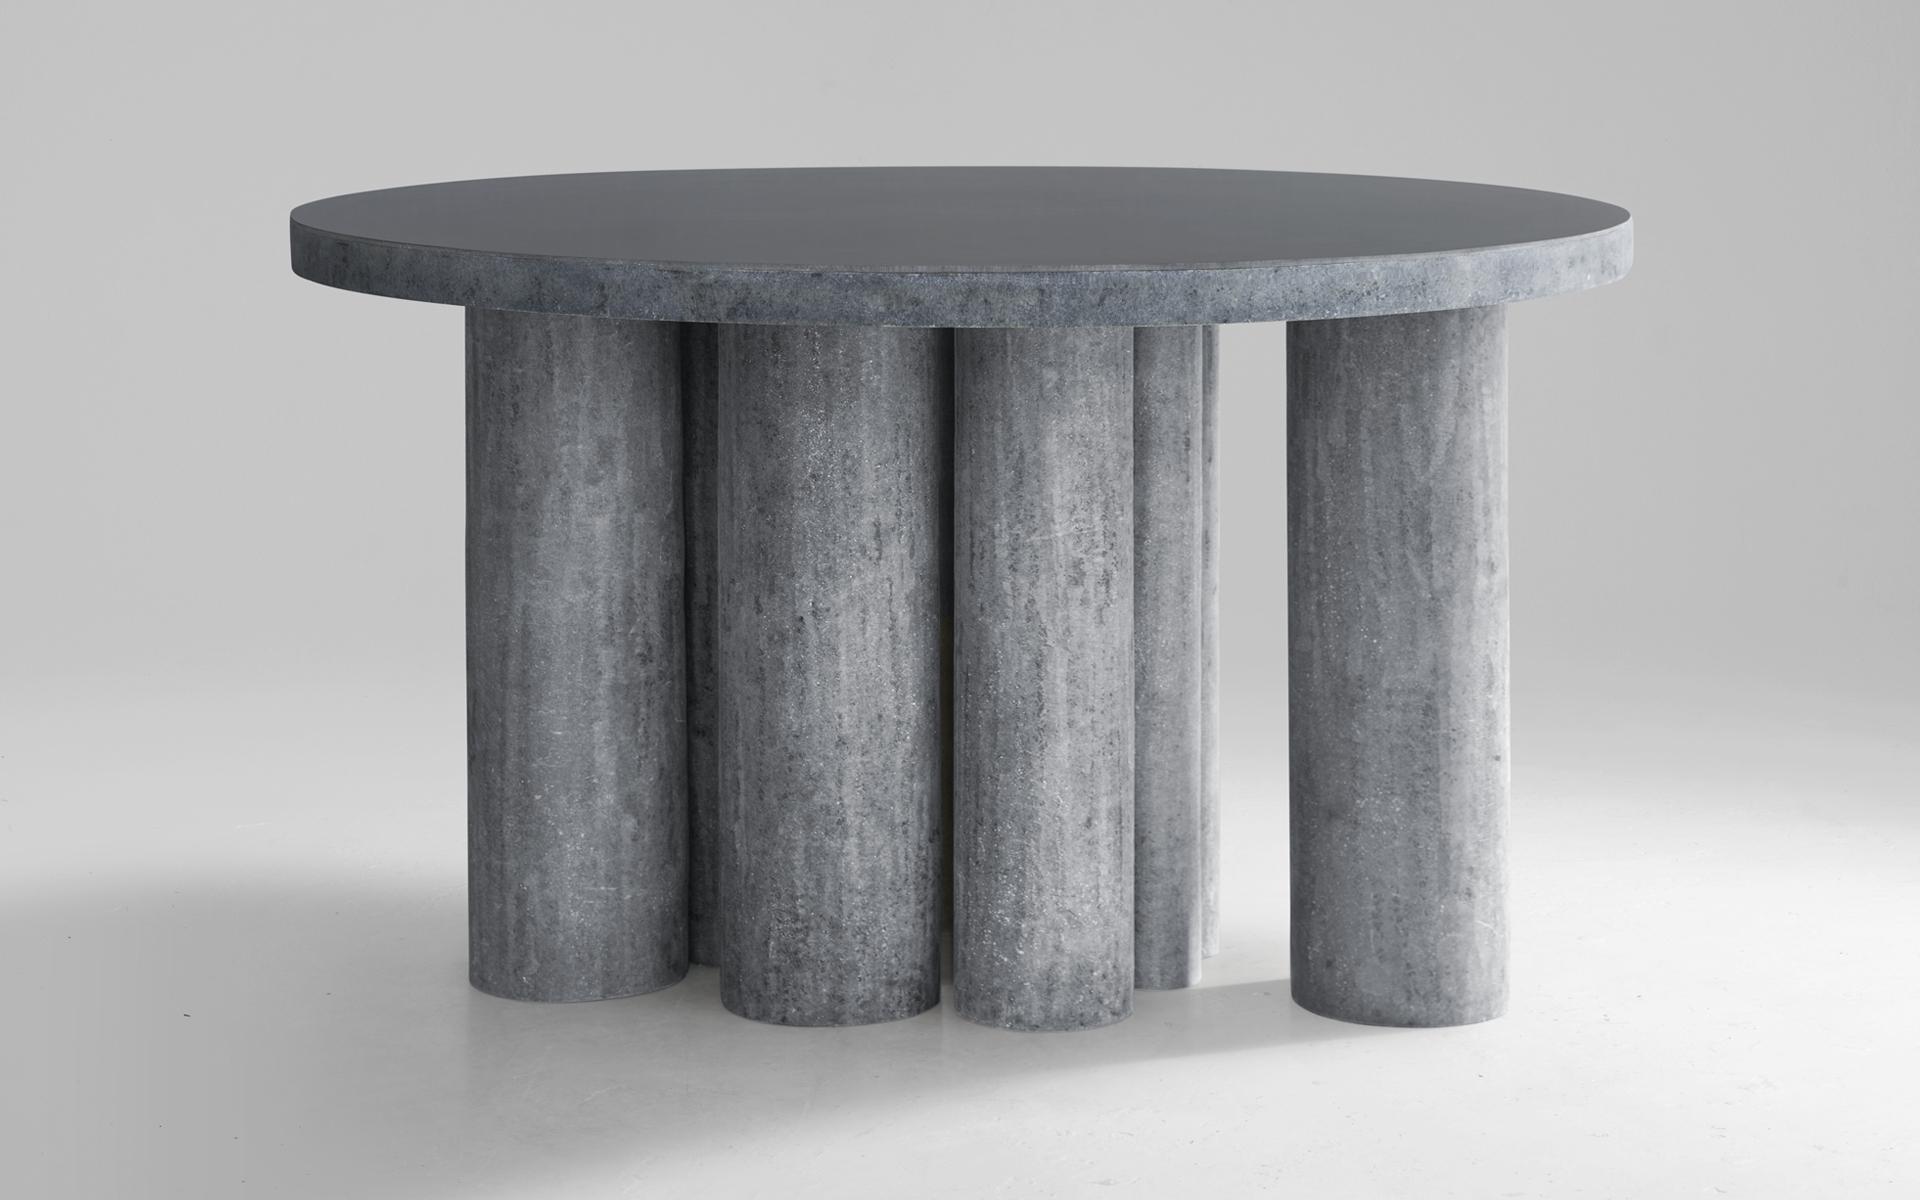 Òrghen table by Imperfettolab
Dimensions: Ø 125 x H 74 cm
Materials: Raw Material

Imperfetto Lab
Who we are ? We are a family.
Verter Turroni, Emanuela Ravelli and our children Elia, Margherita and Eusebio.
All together, we are separate